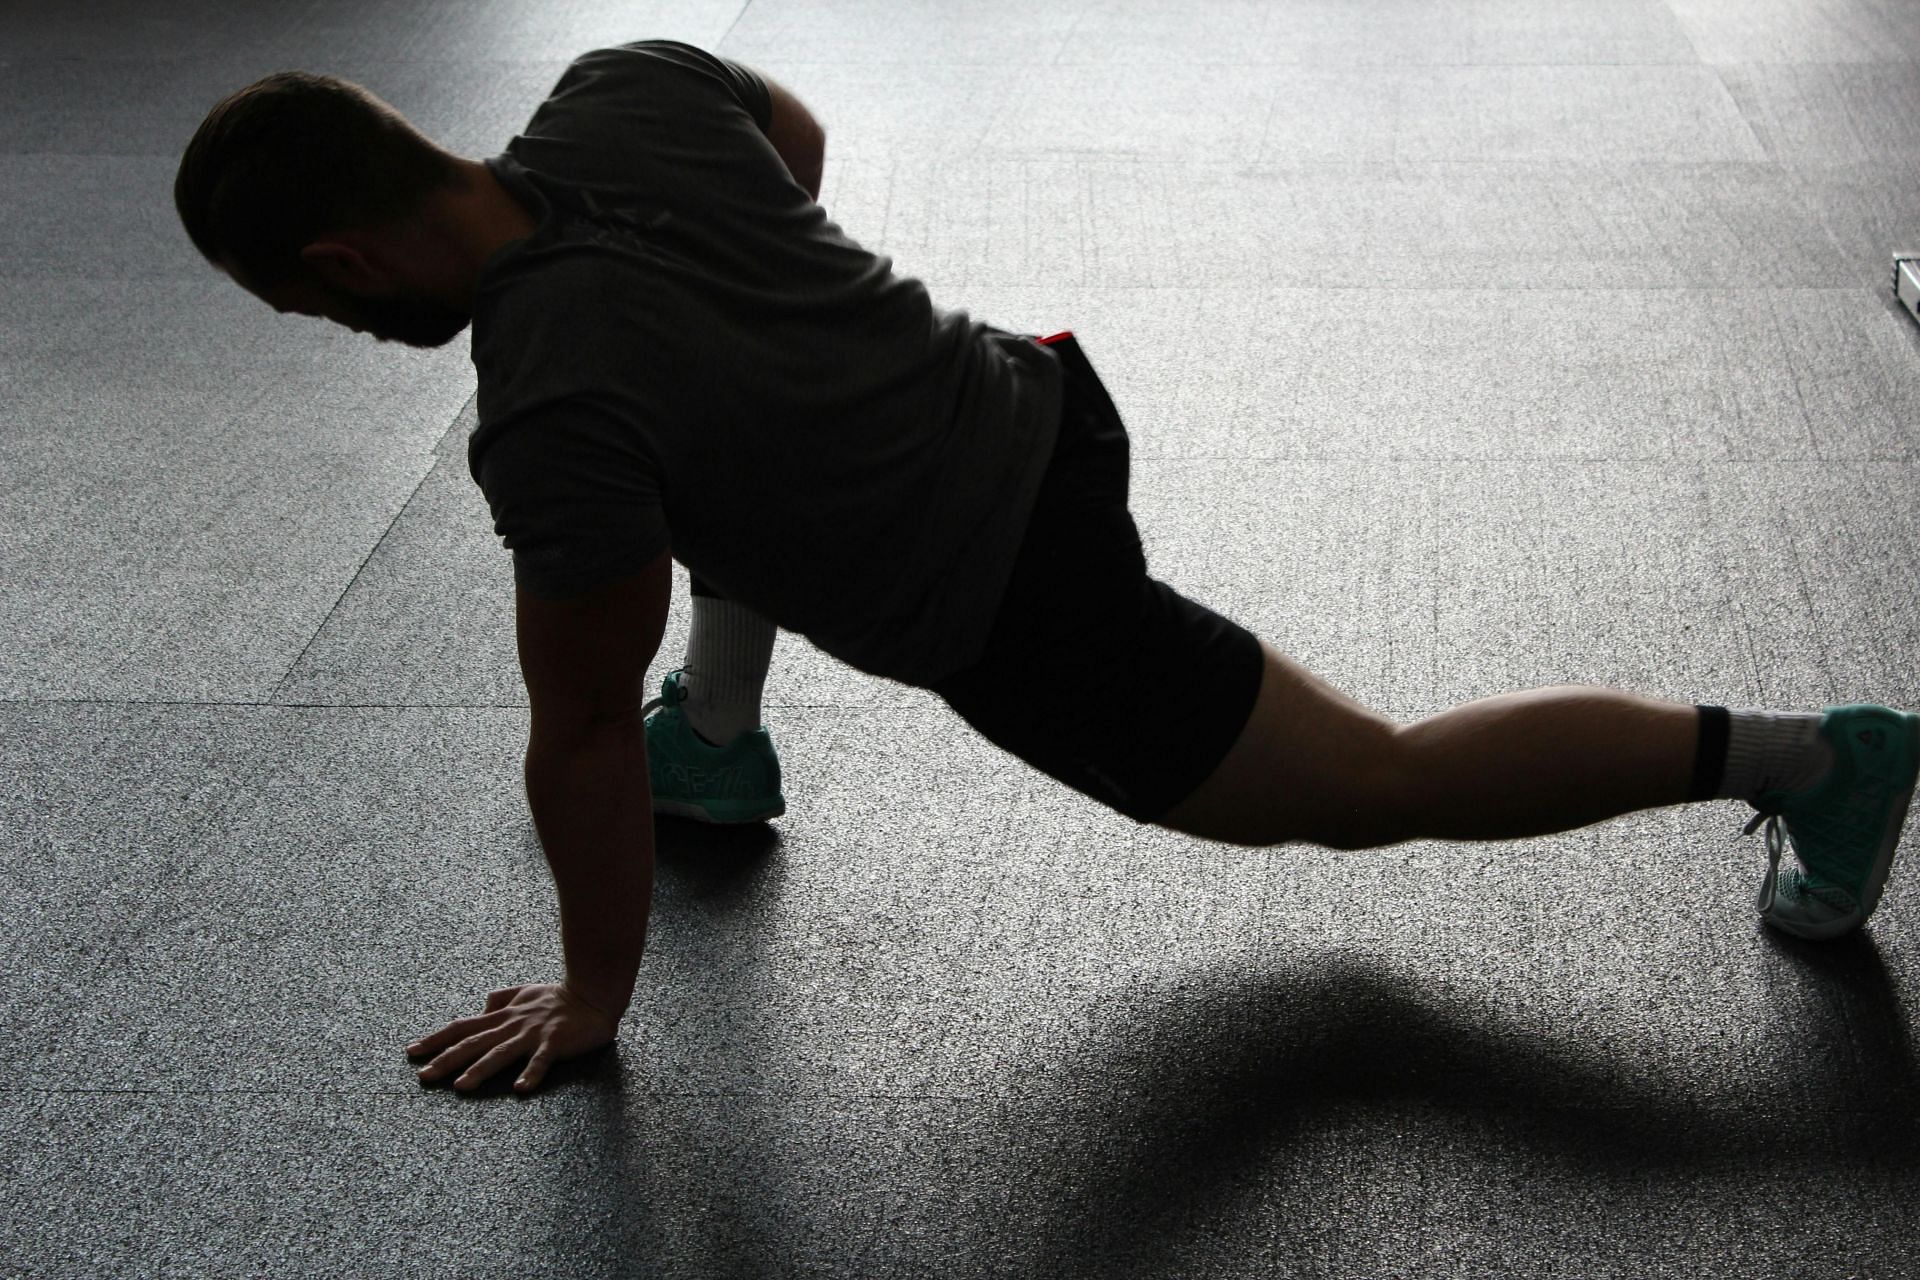 Posterior capsule stretch (image sourced via Pexels / Photo by pixabay)